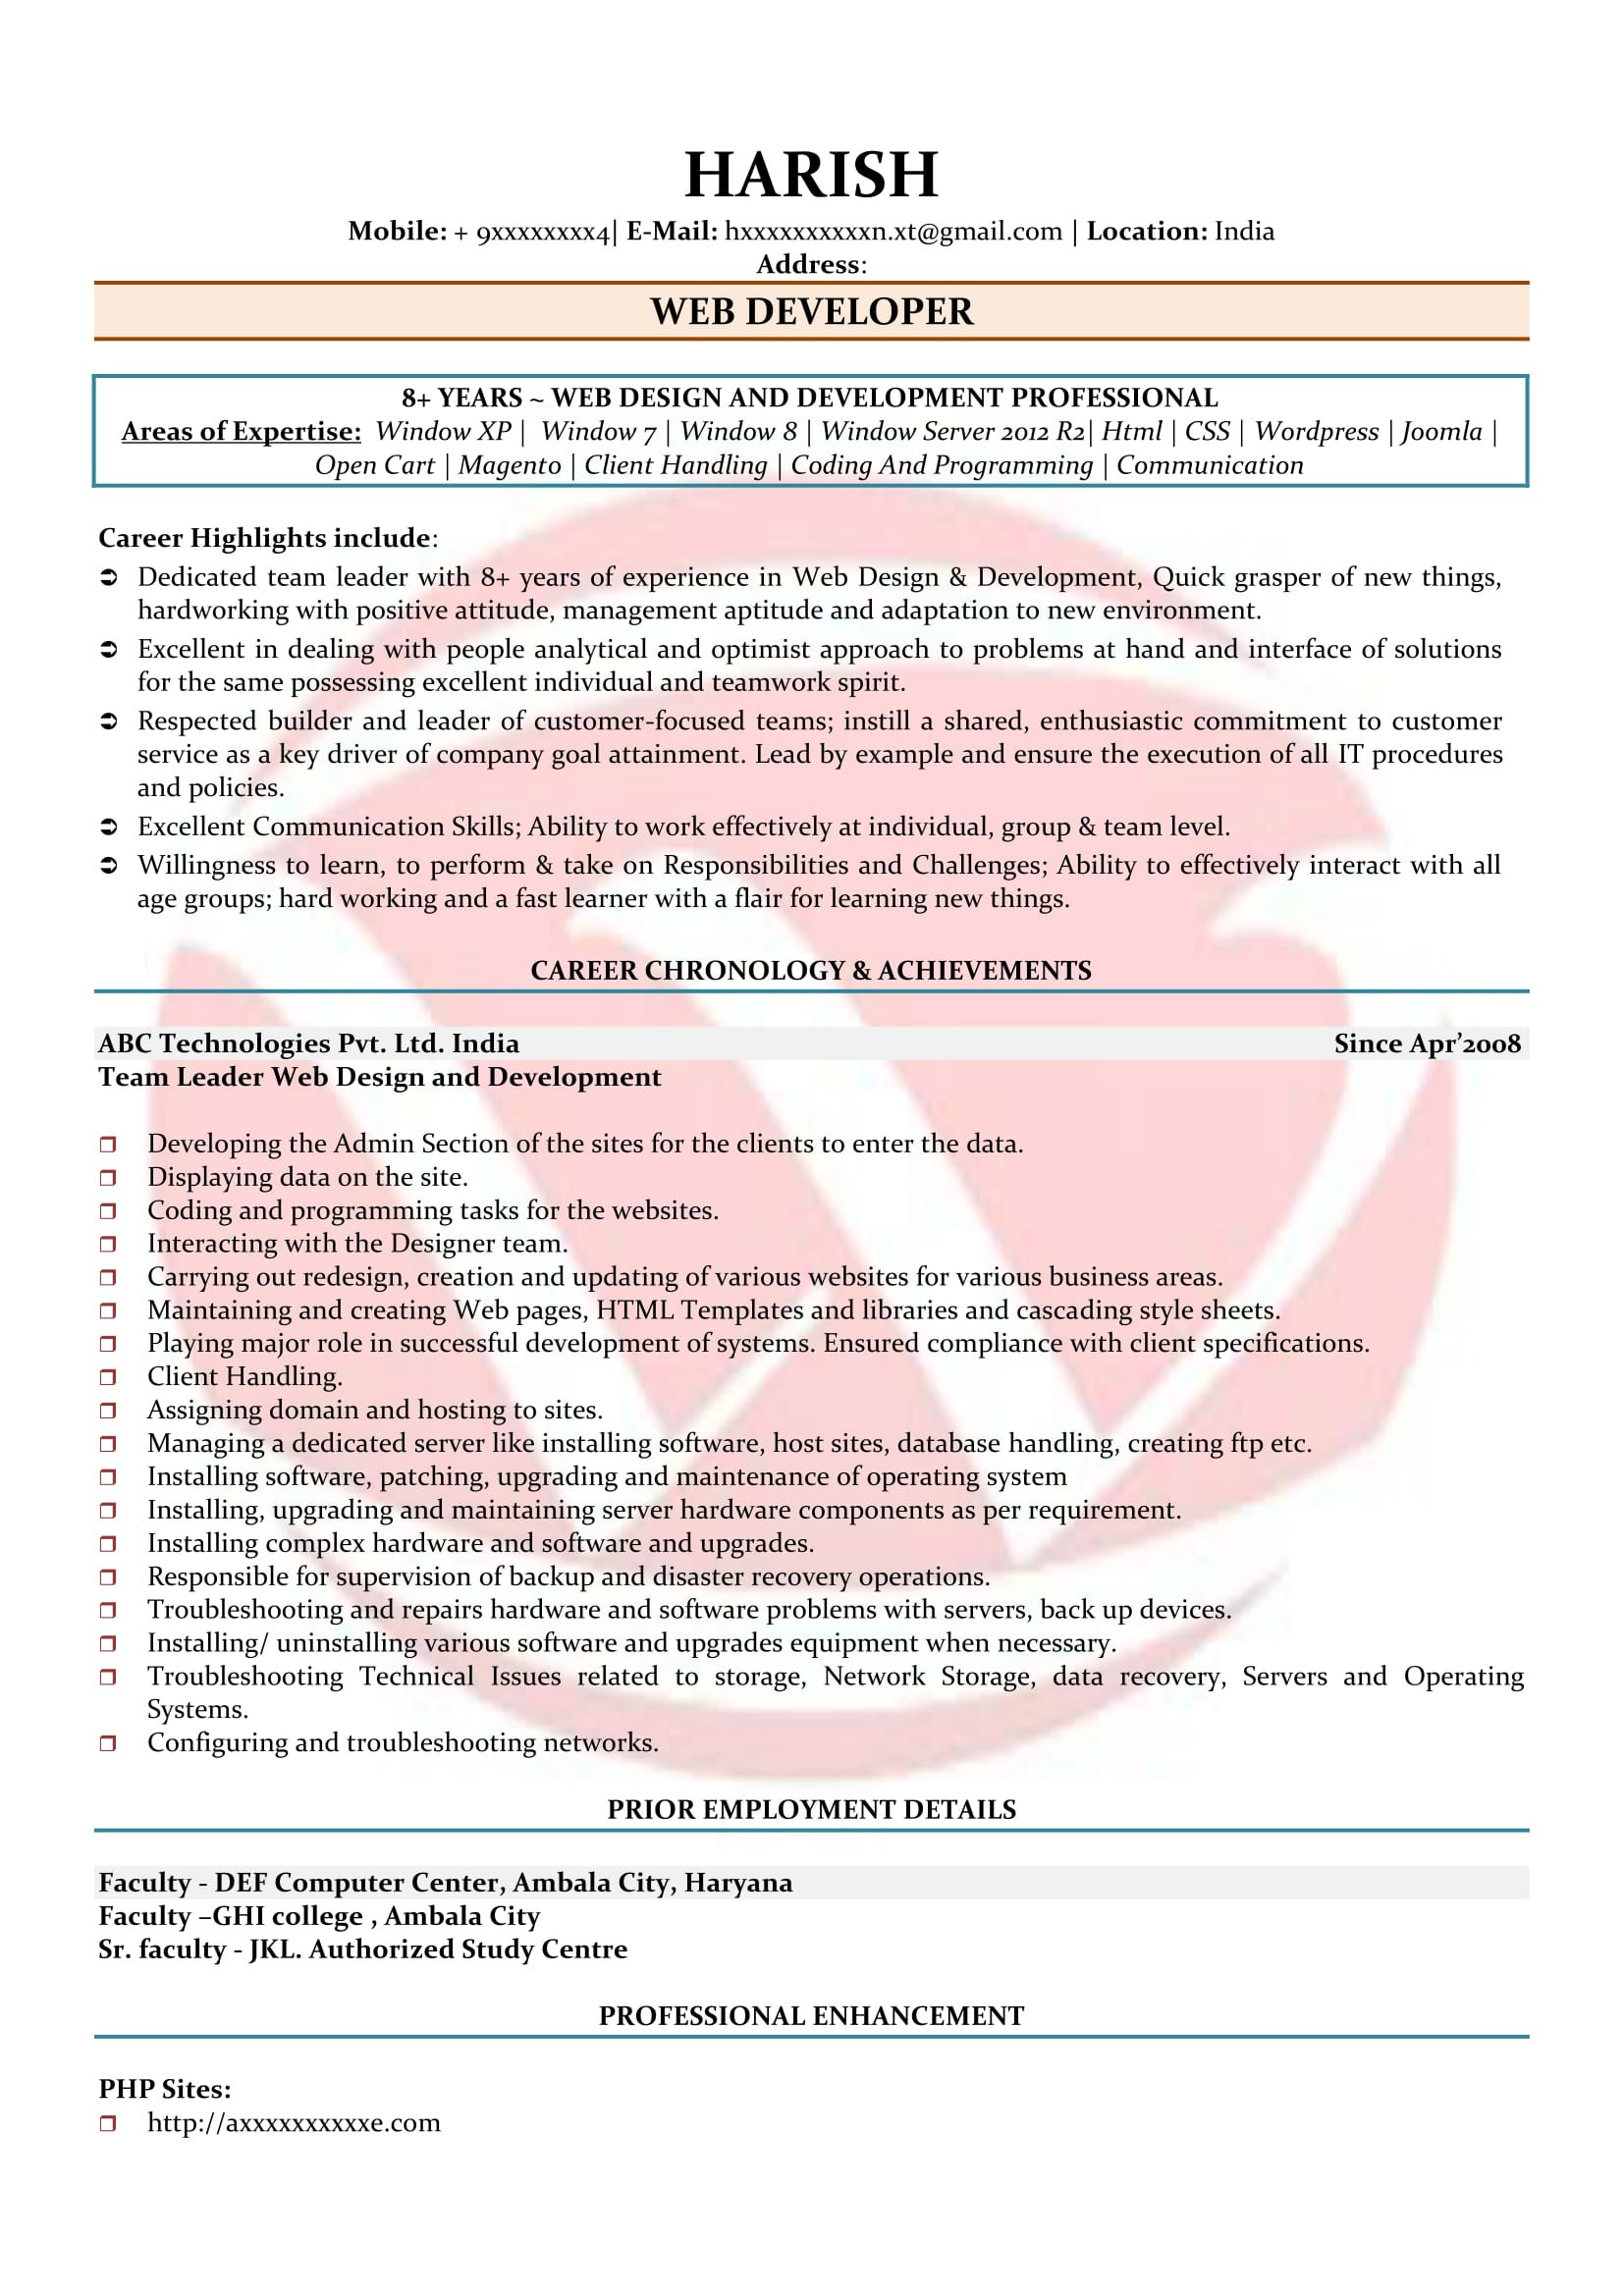 Sample Resume for Hadoop Developer with asp.net Web Developer Sample Resumes, Download Resume format Templates!